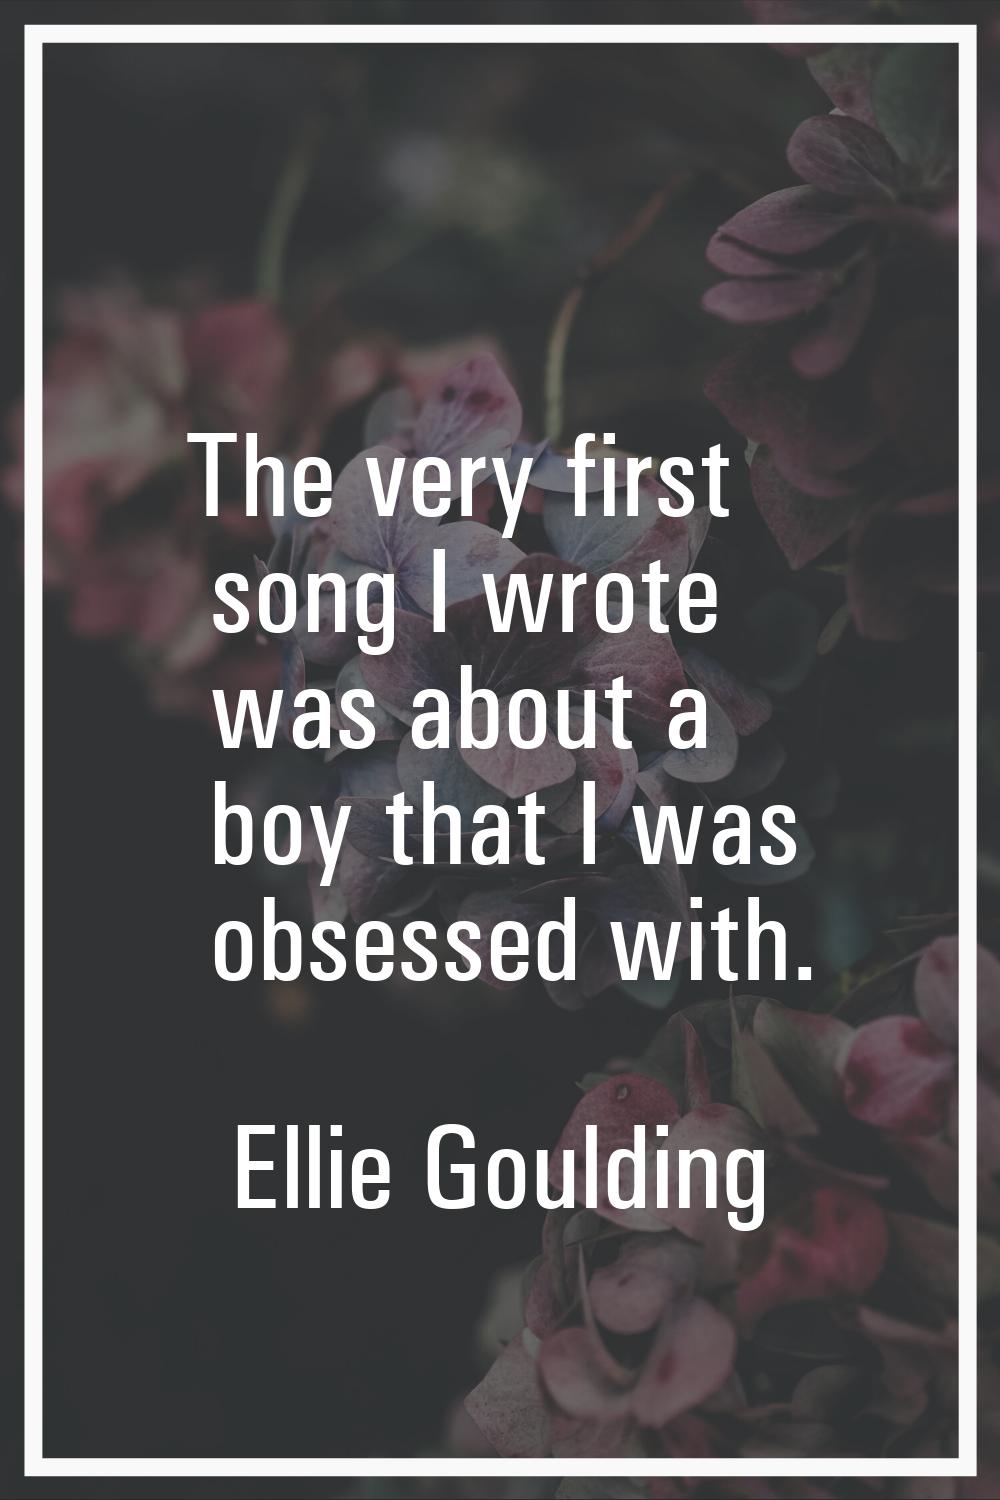 The very first song I wrote was about a boy that I was obsessed with.